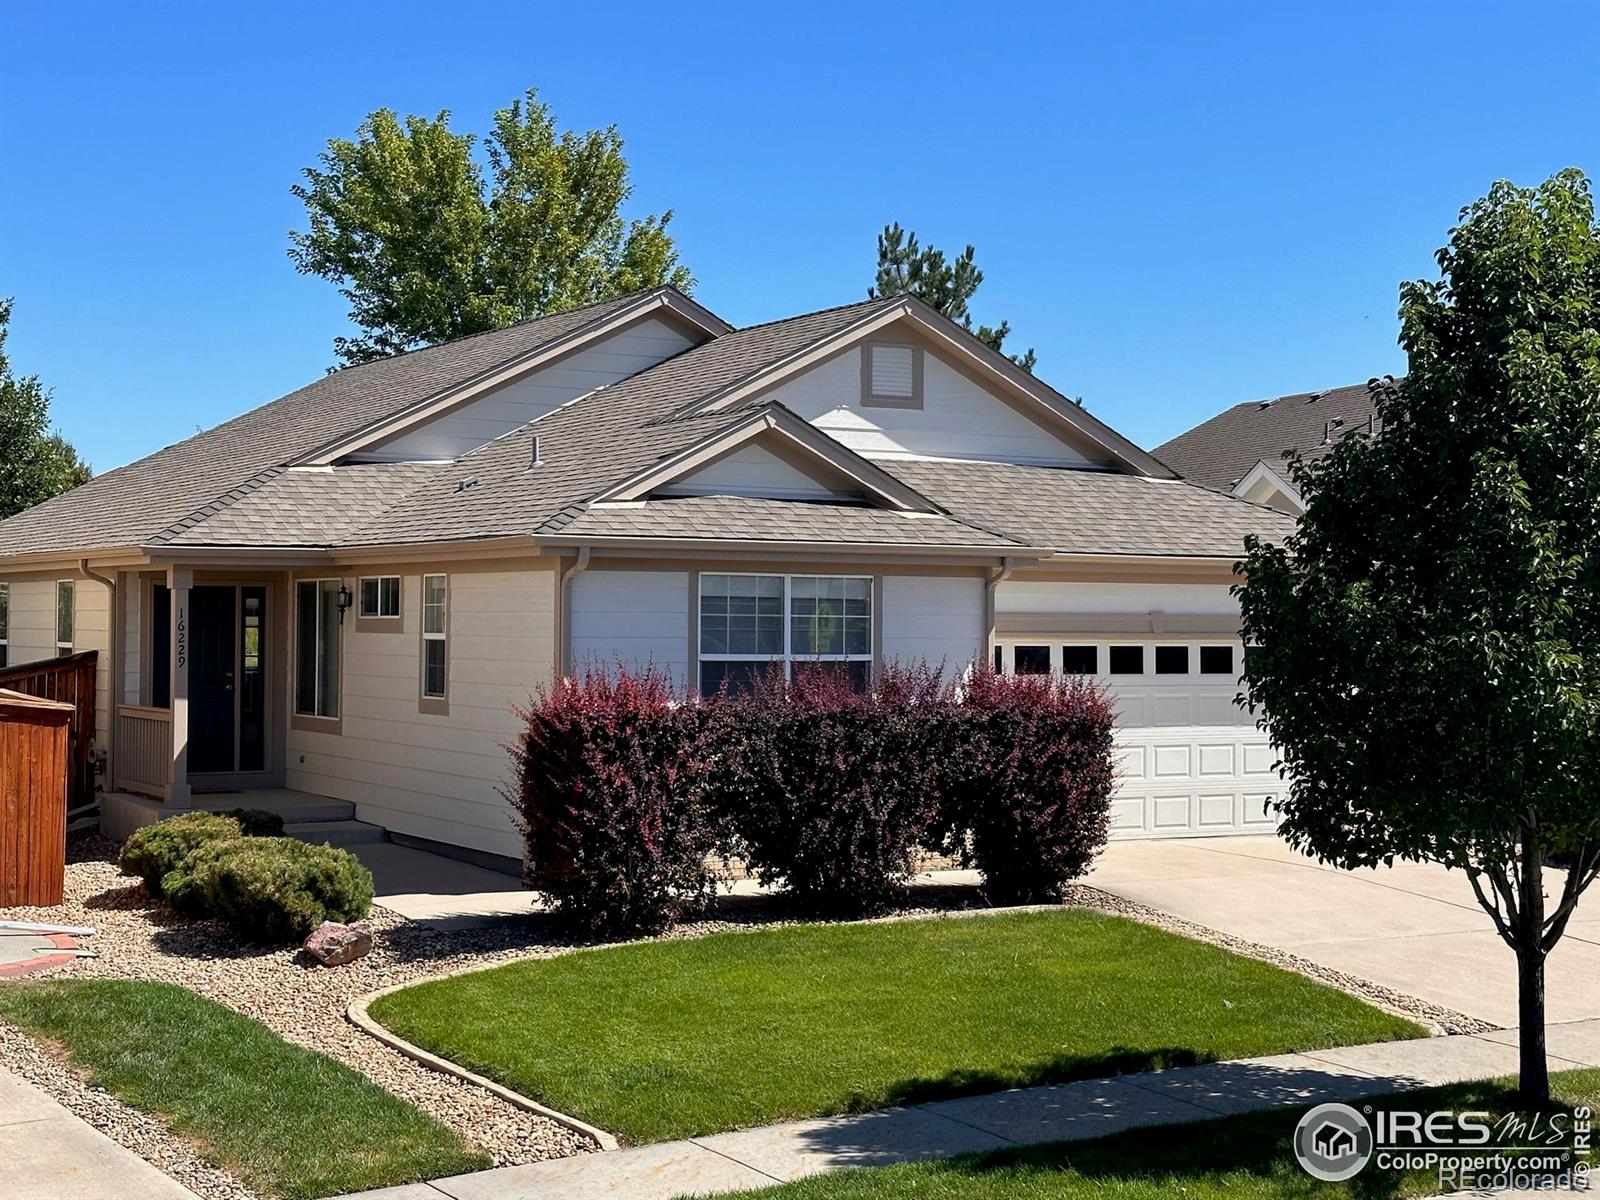 16229 E 105th Way, commerce city MLS: 123456789997461 Beds: 3 Baths: 2 Price: $489,900